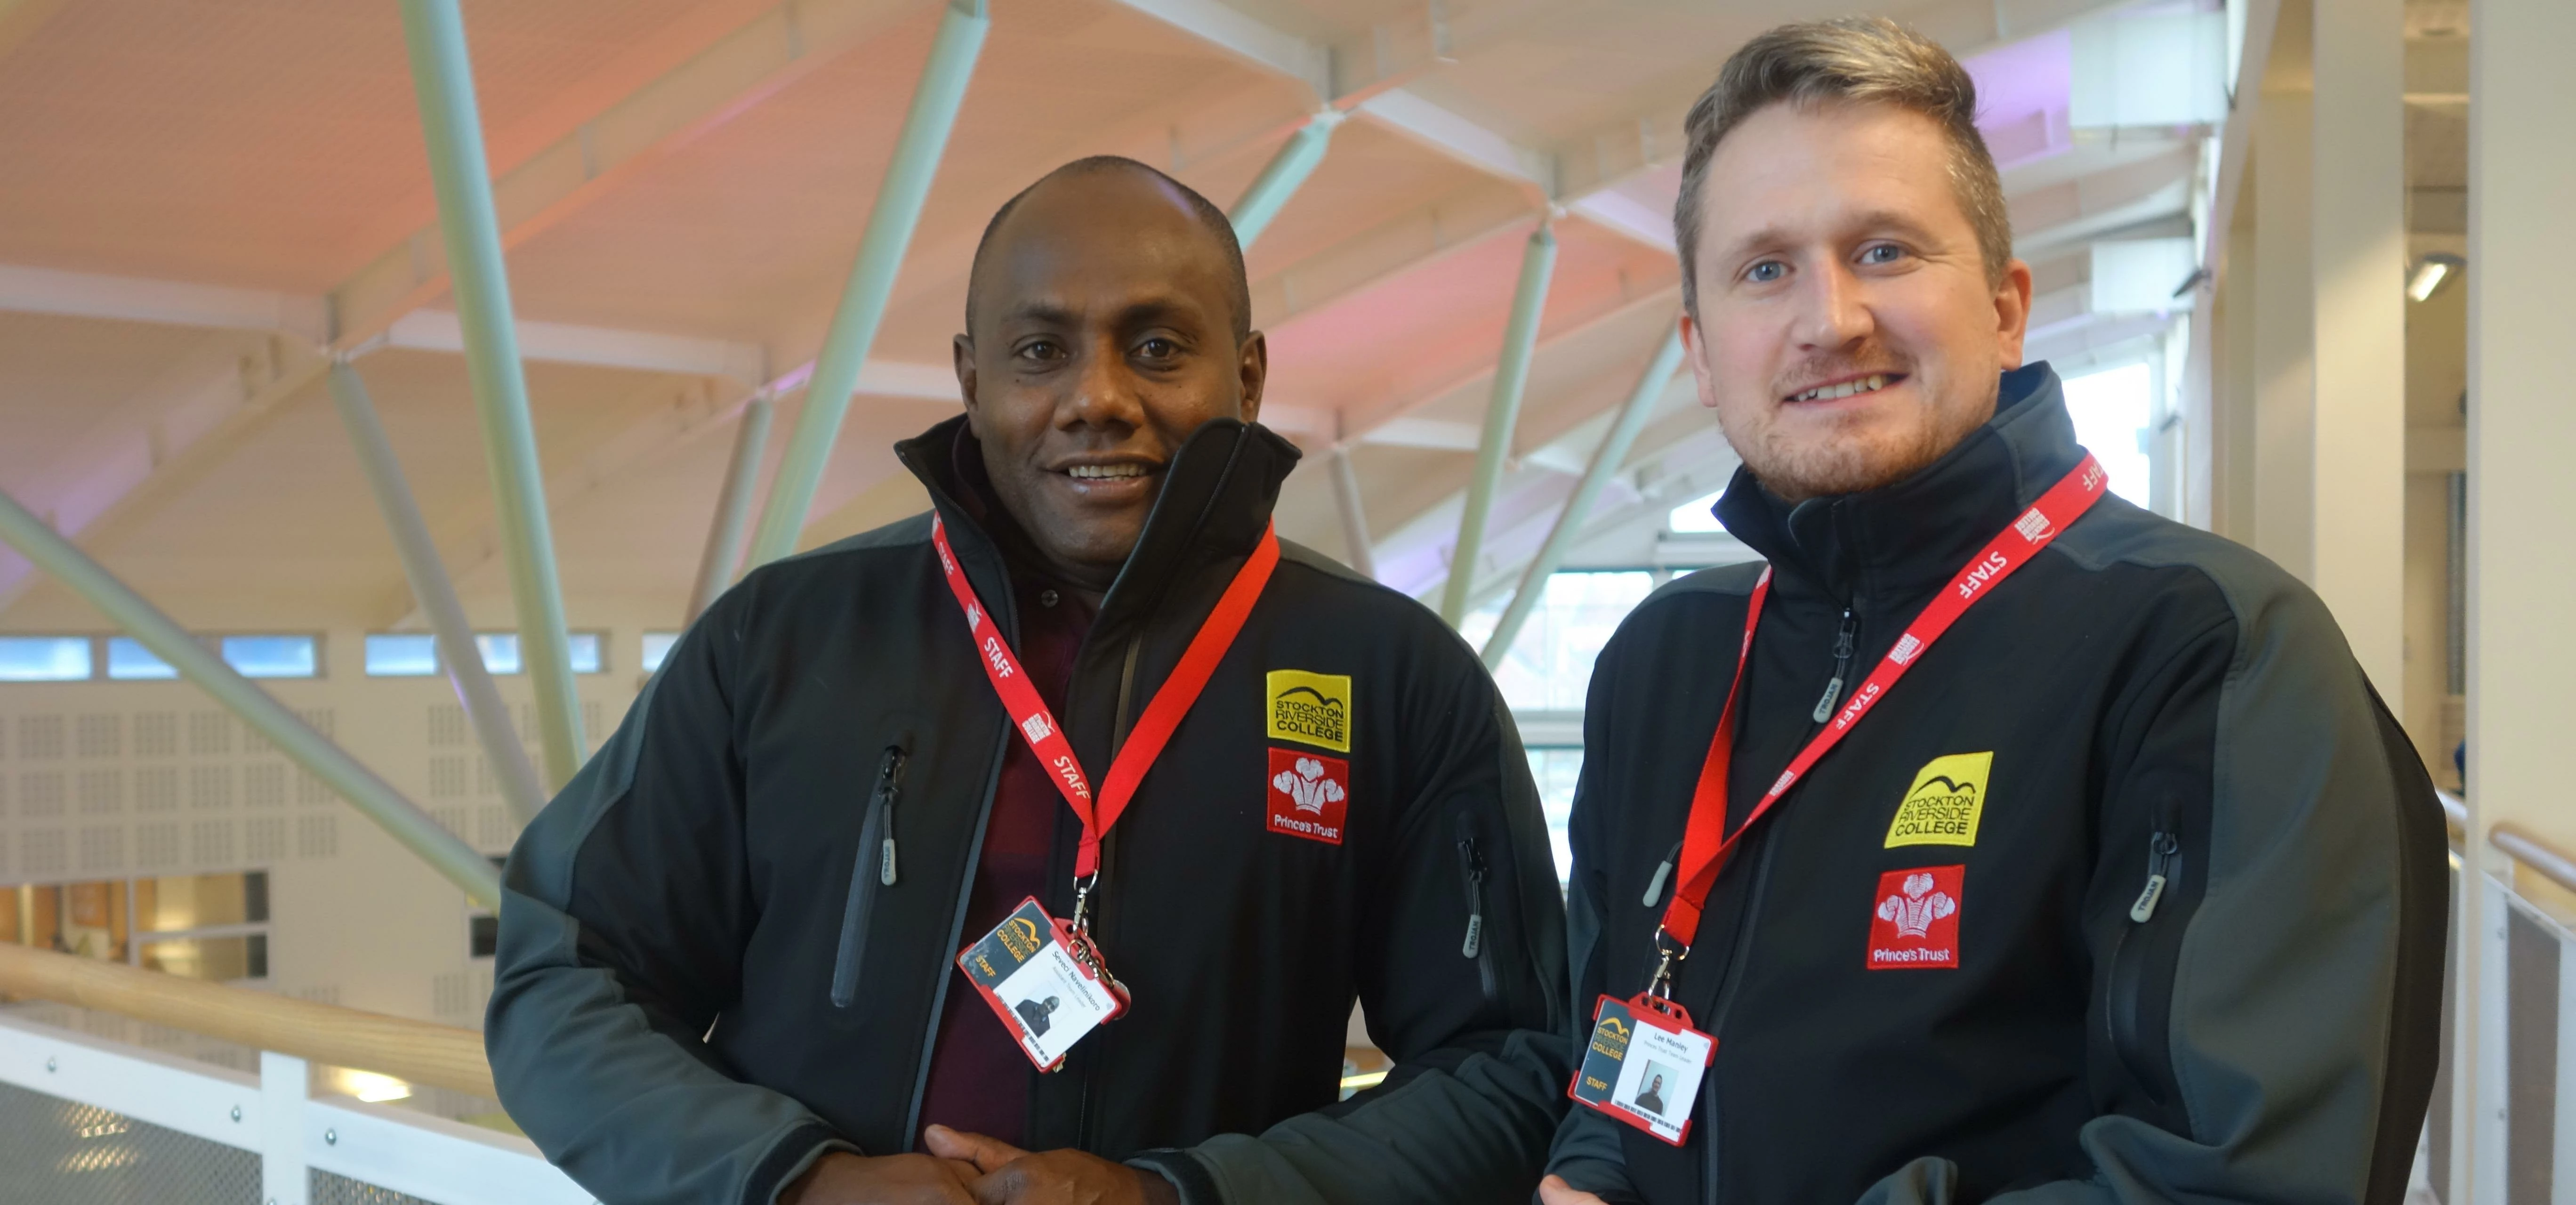 Former soldiers Seveci Navelinikoro (left) and Lee Manley to lead Prince's Trust Team programme in C